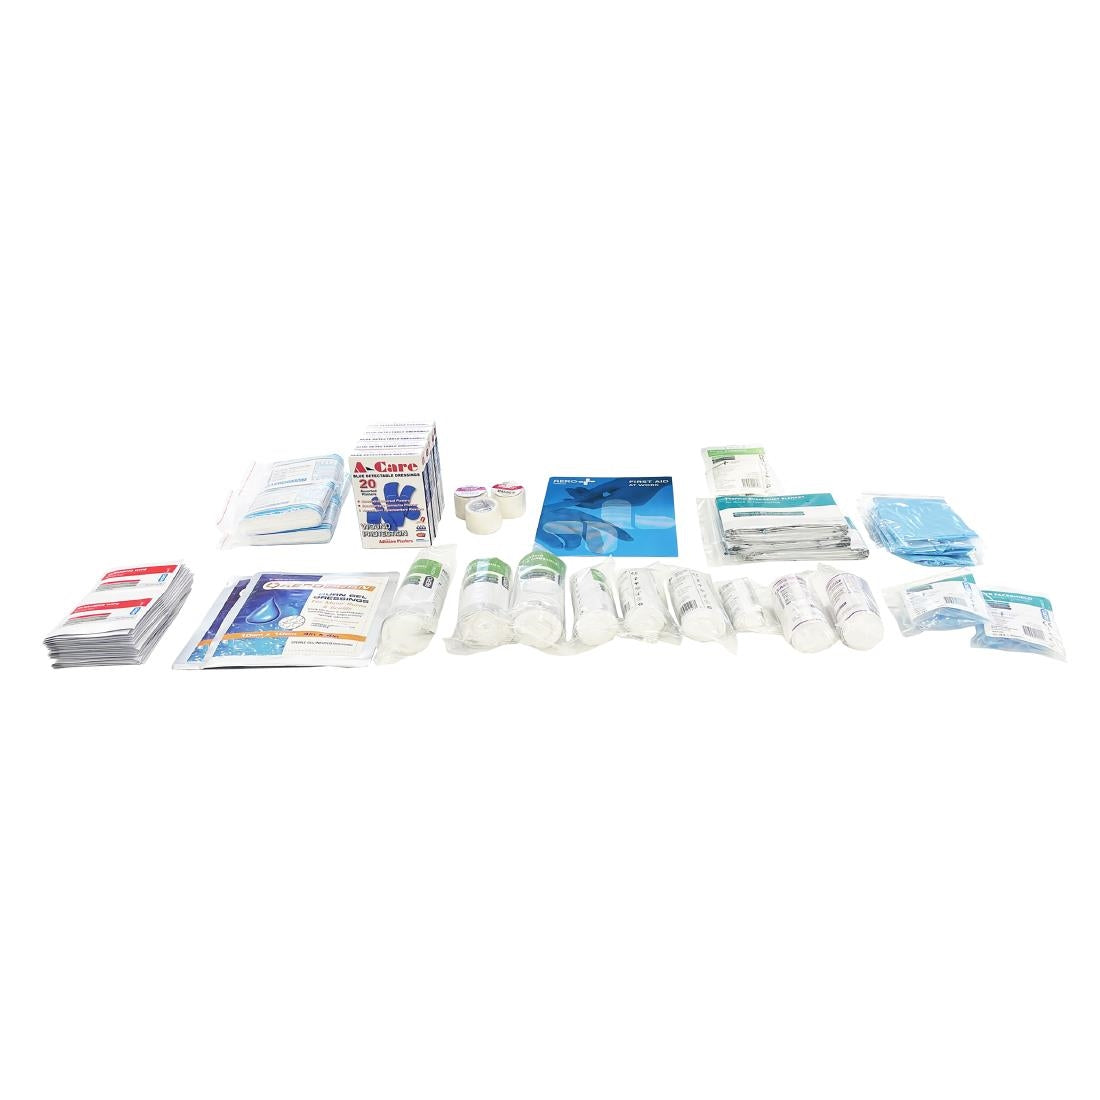 FT594 Aero Aerokit BS 8599 Large Catering First Aid Kit Refill JD Catering Equipment Solutions Ltd